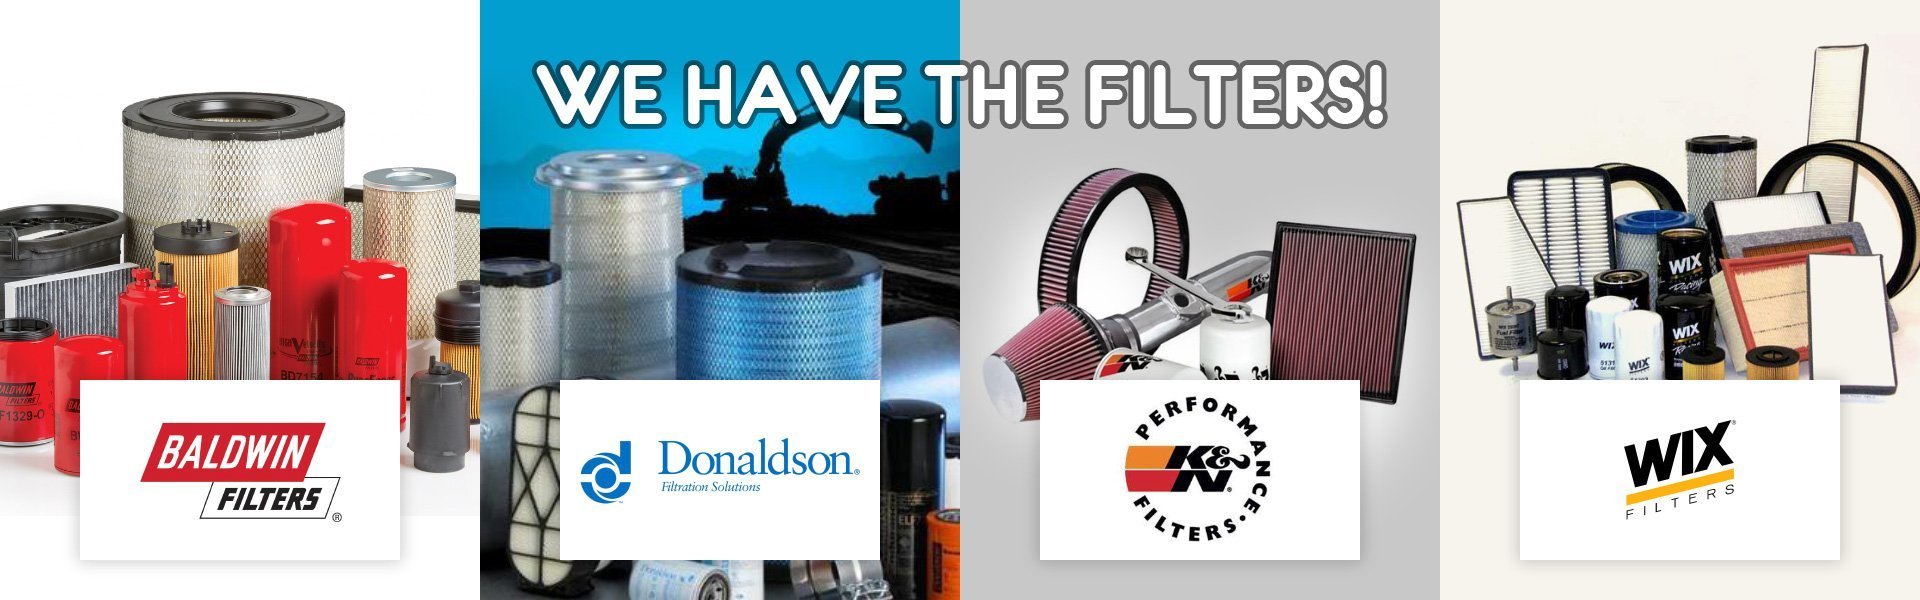 We Have The Filters - Baldwin, Donaldson, K&N and Wix